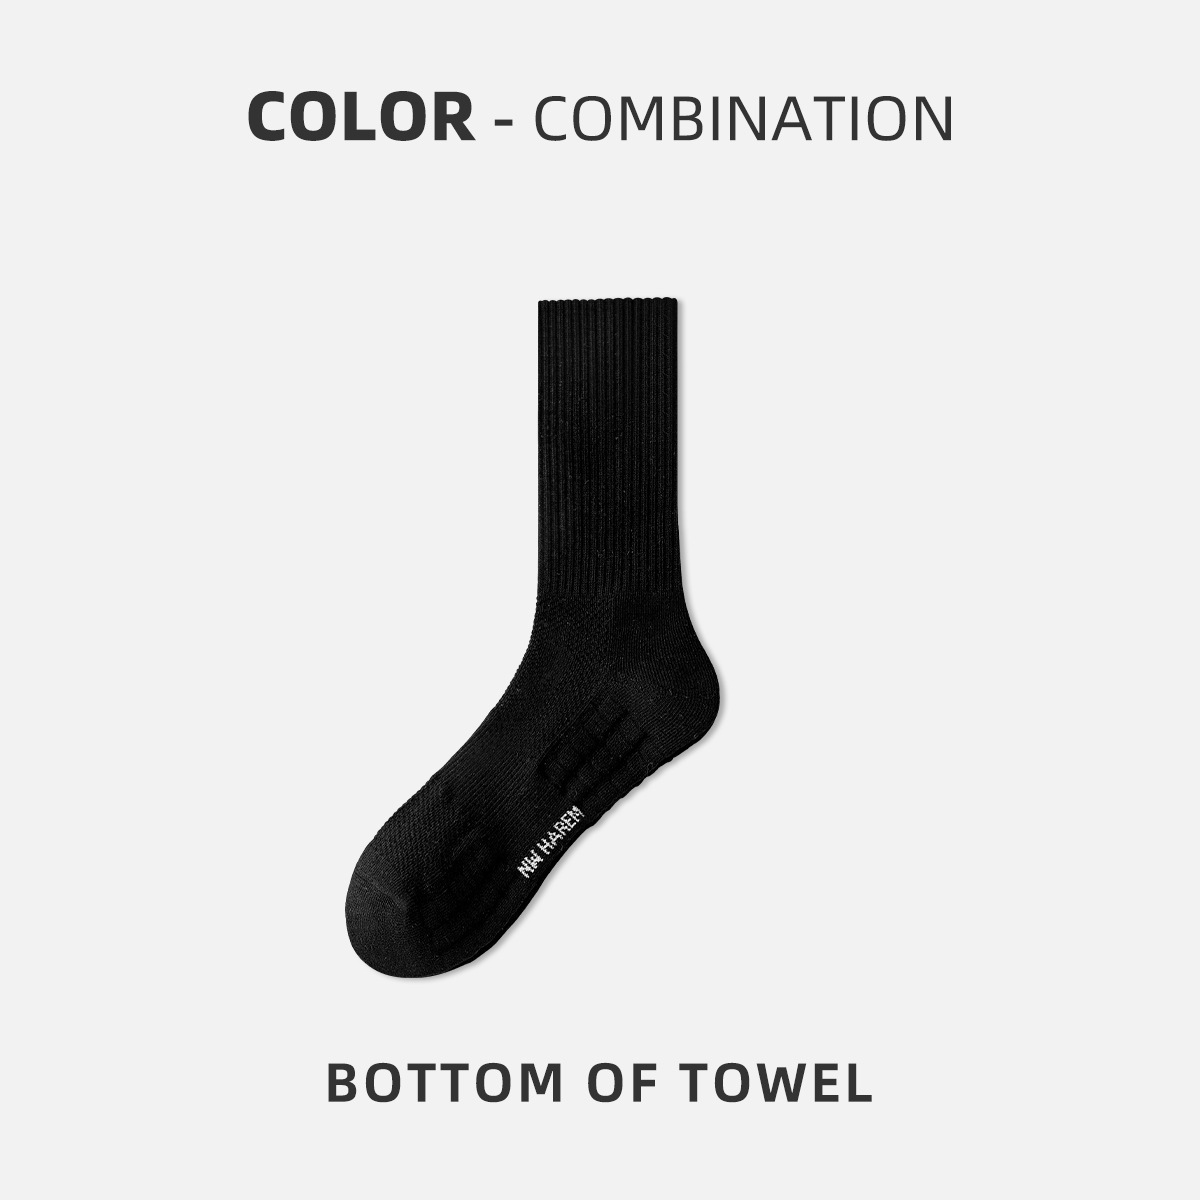 Basketball Socks Men's Mid-Calf Length Sock Wholesale Autumn and Winter Professional Sports Thickening Towel Bottom Sweat-Absorbent Breathable White Long Socks